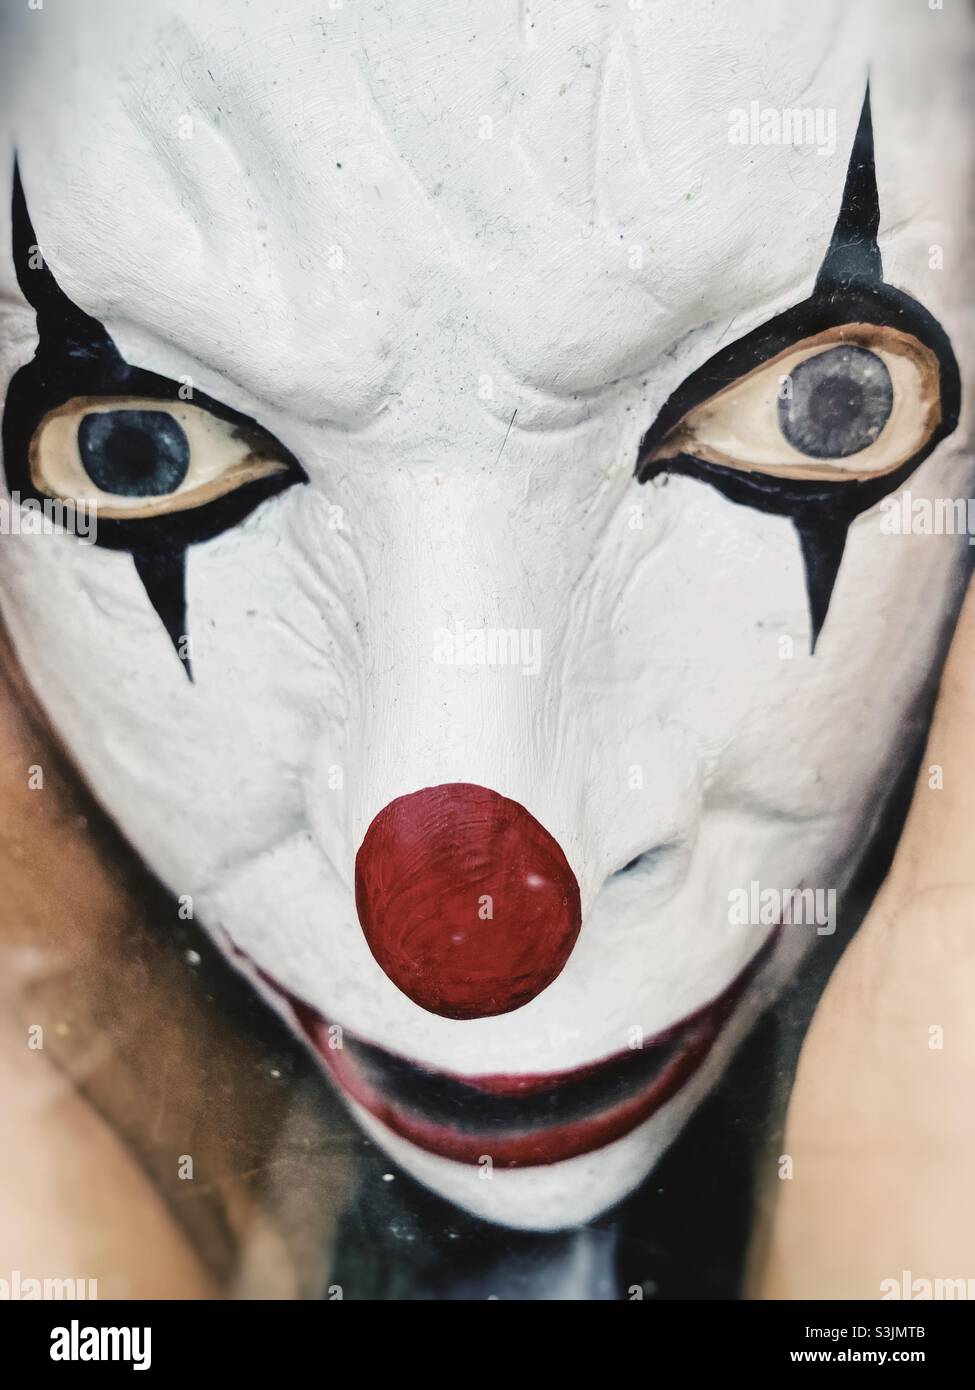 Halloween mask or face paint costume of a scary clown face Stock Photo